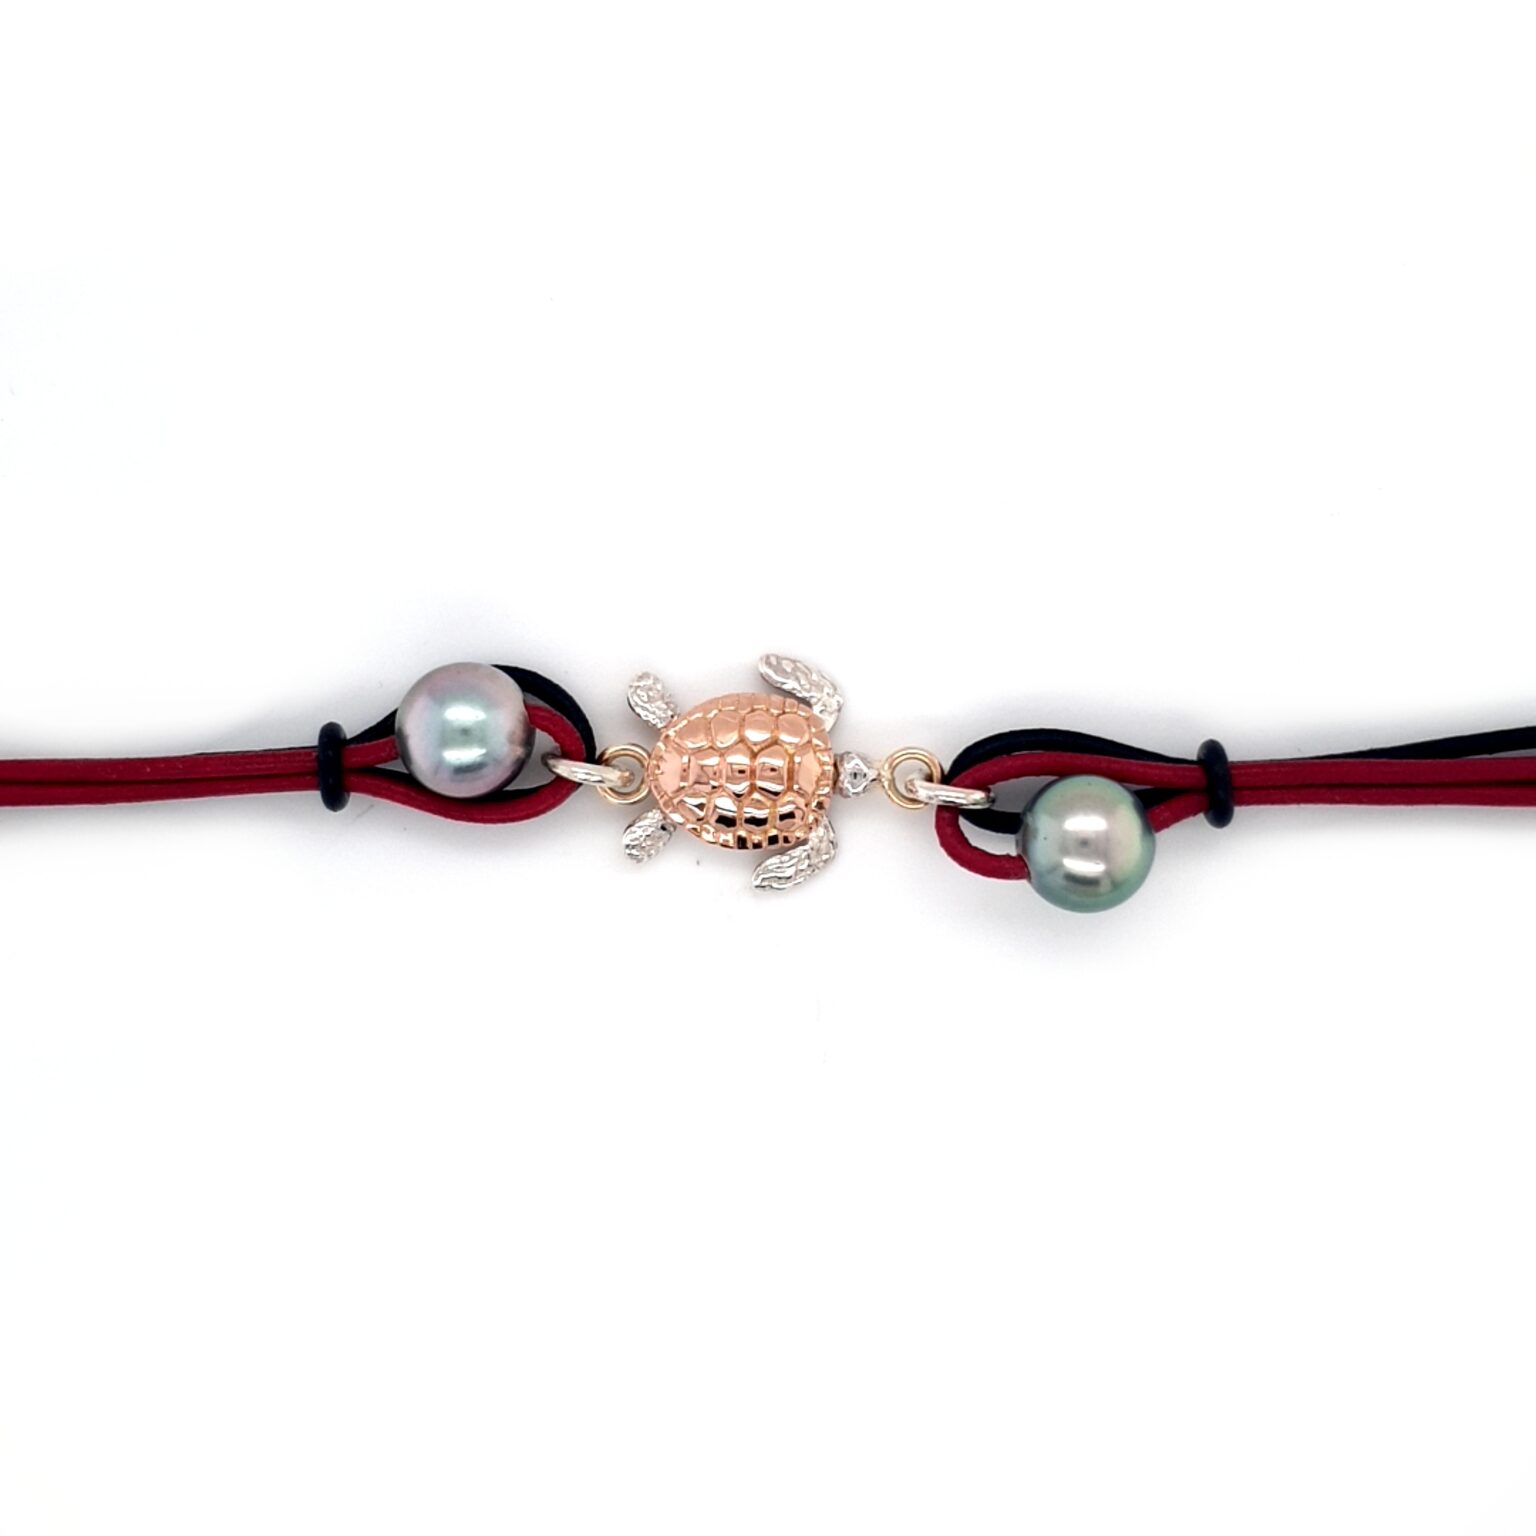 Coral Bay 9K Rose Gold and Sterling Silver Turtle Leather Bracelet with Abrolhos Pearls_0